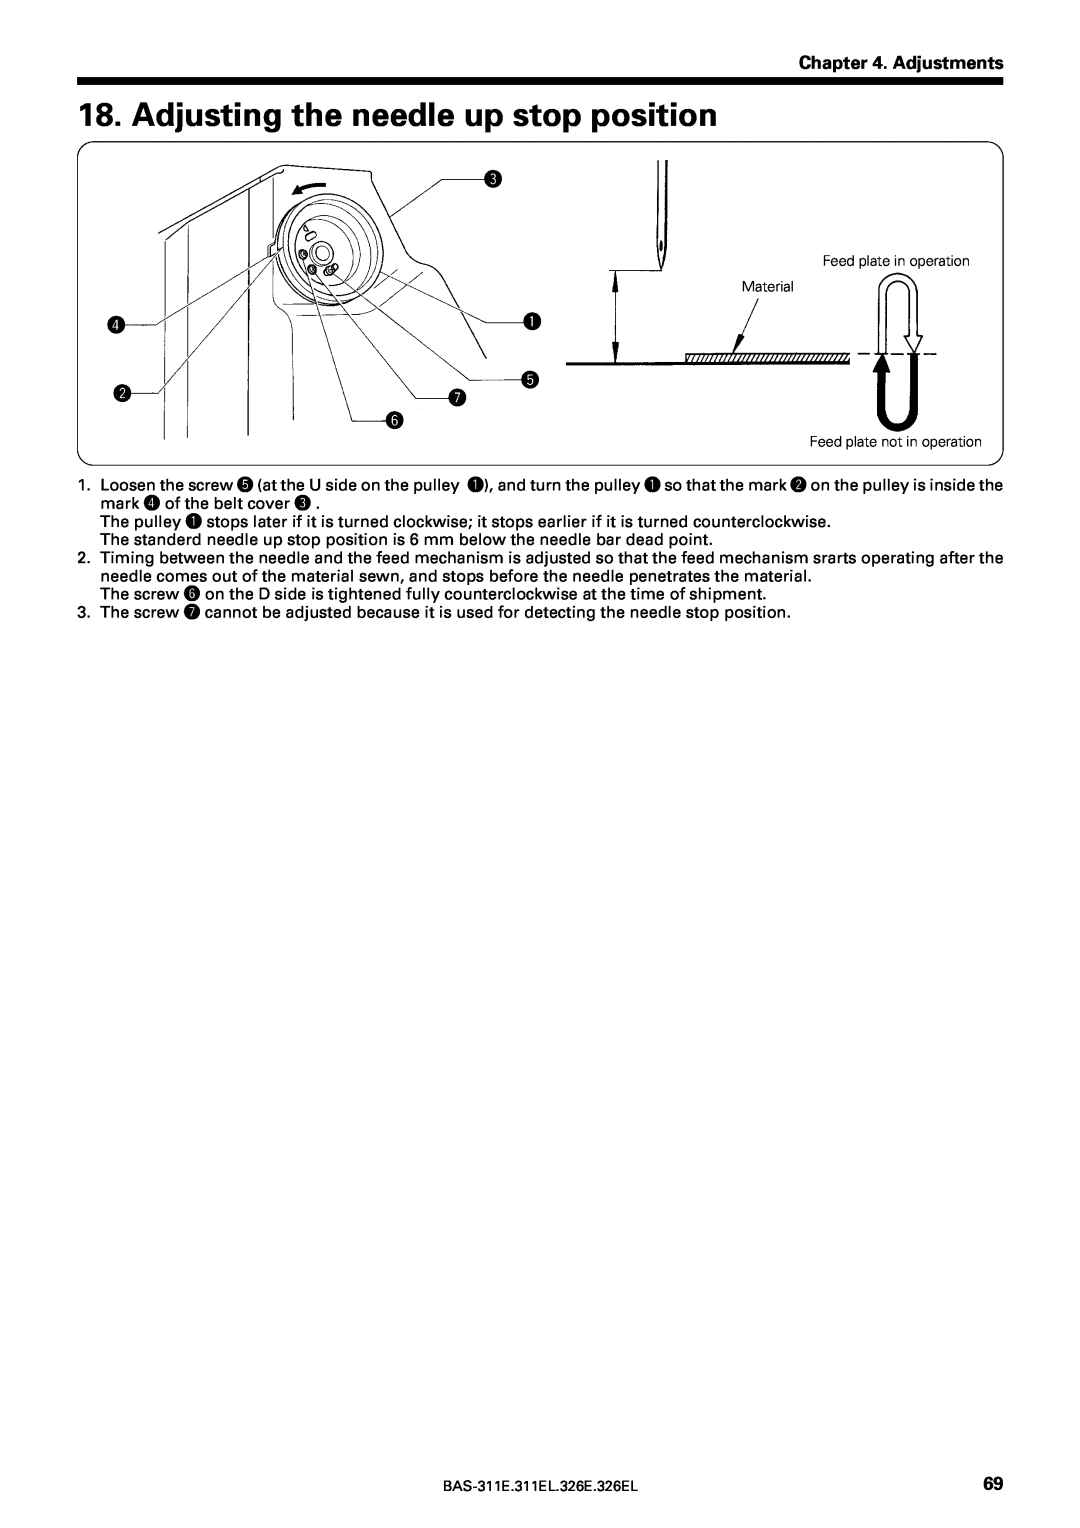 Brother BAS-311E service manual Adjusting the needle up stop position, Adjustments, wu y 